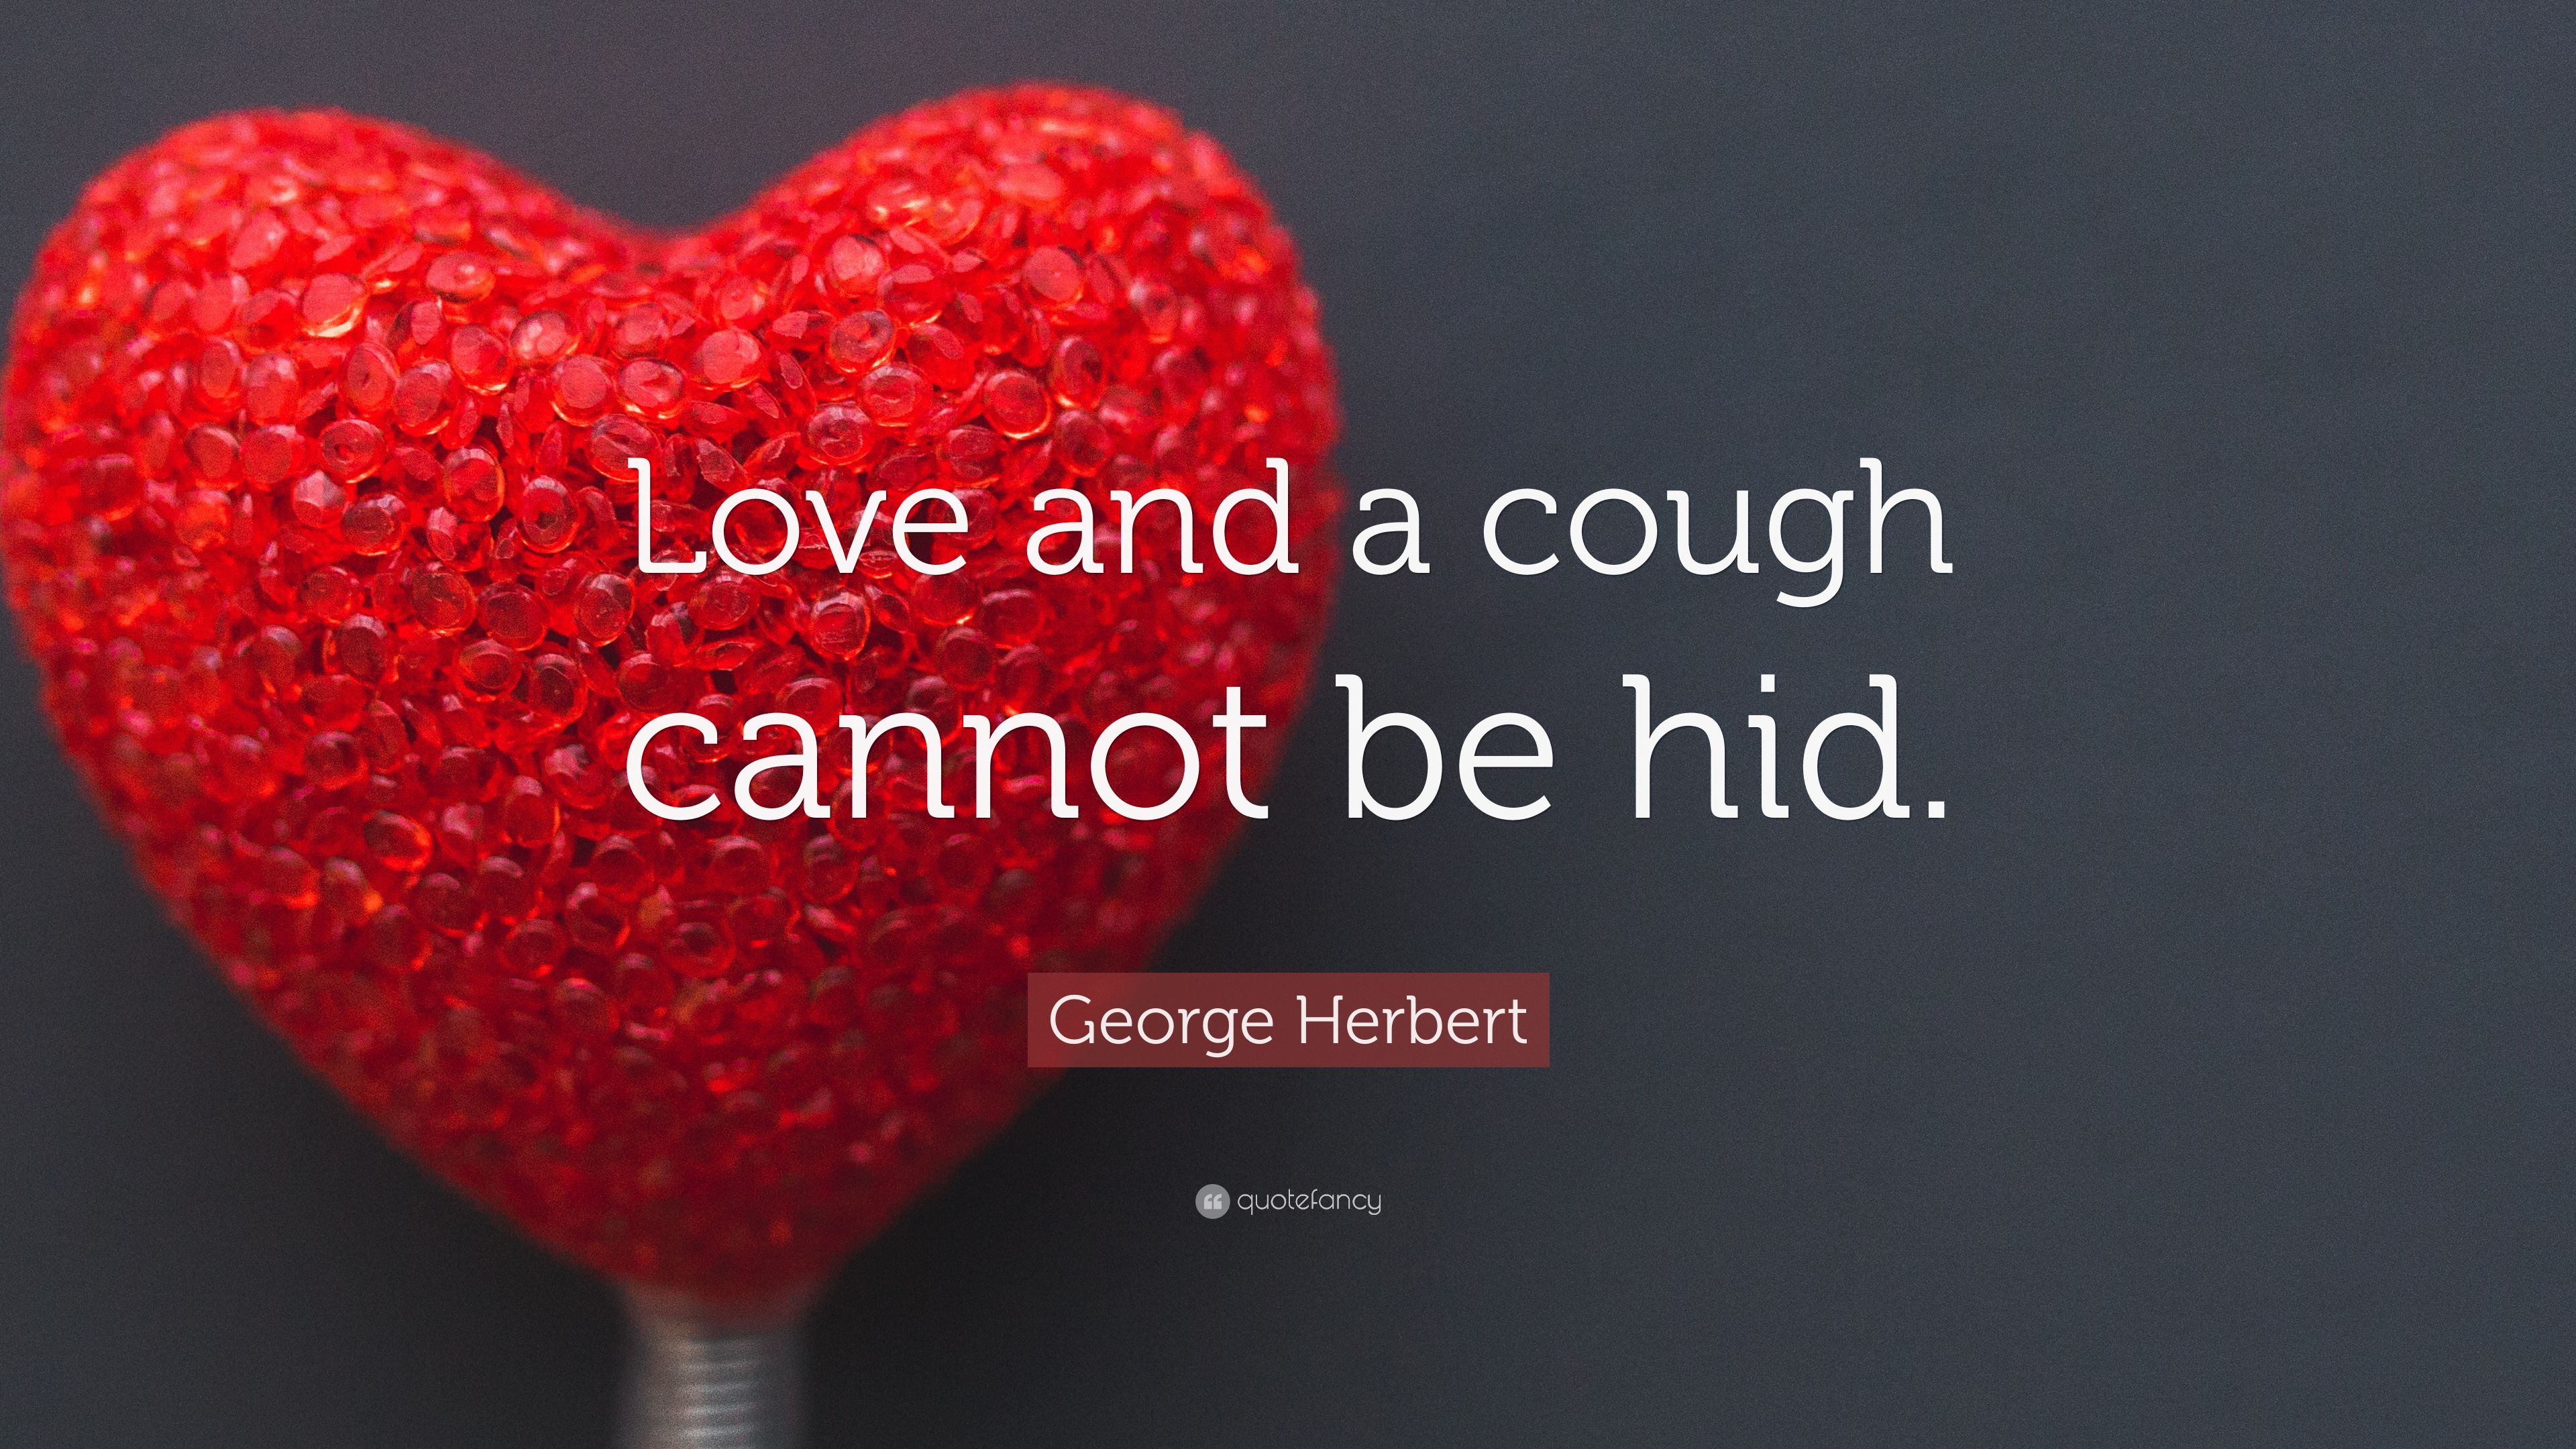 George Herbert Quote: “Love and a cough cannot be hid.” 23